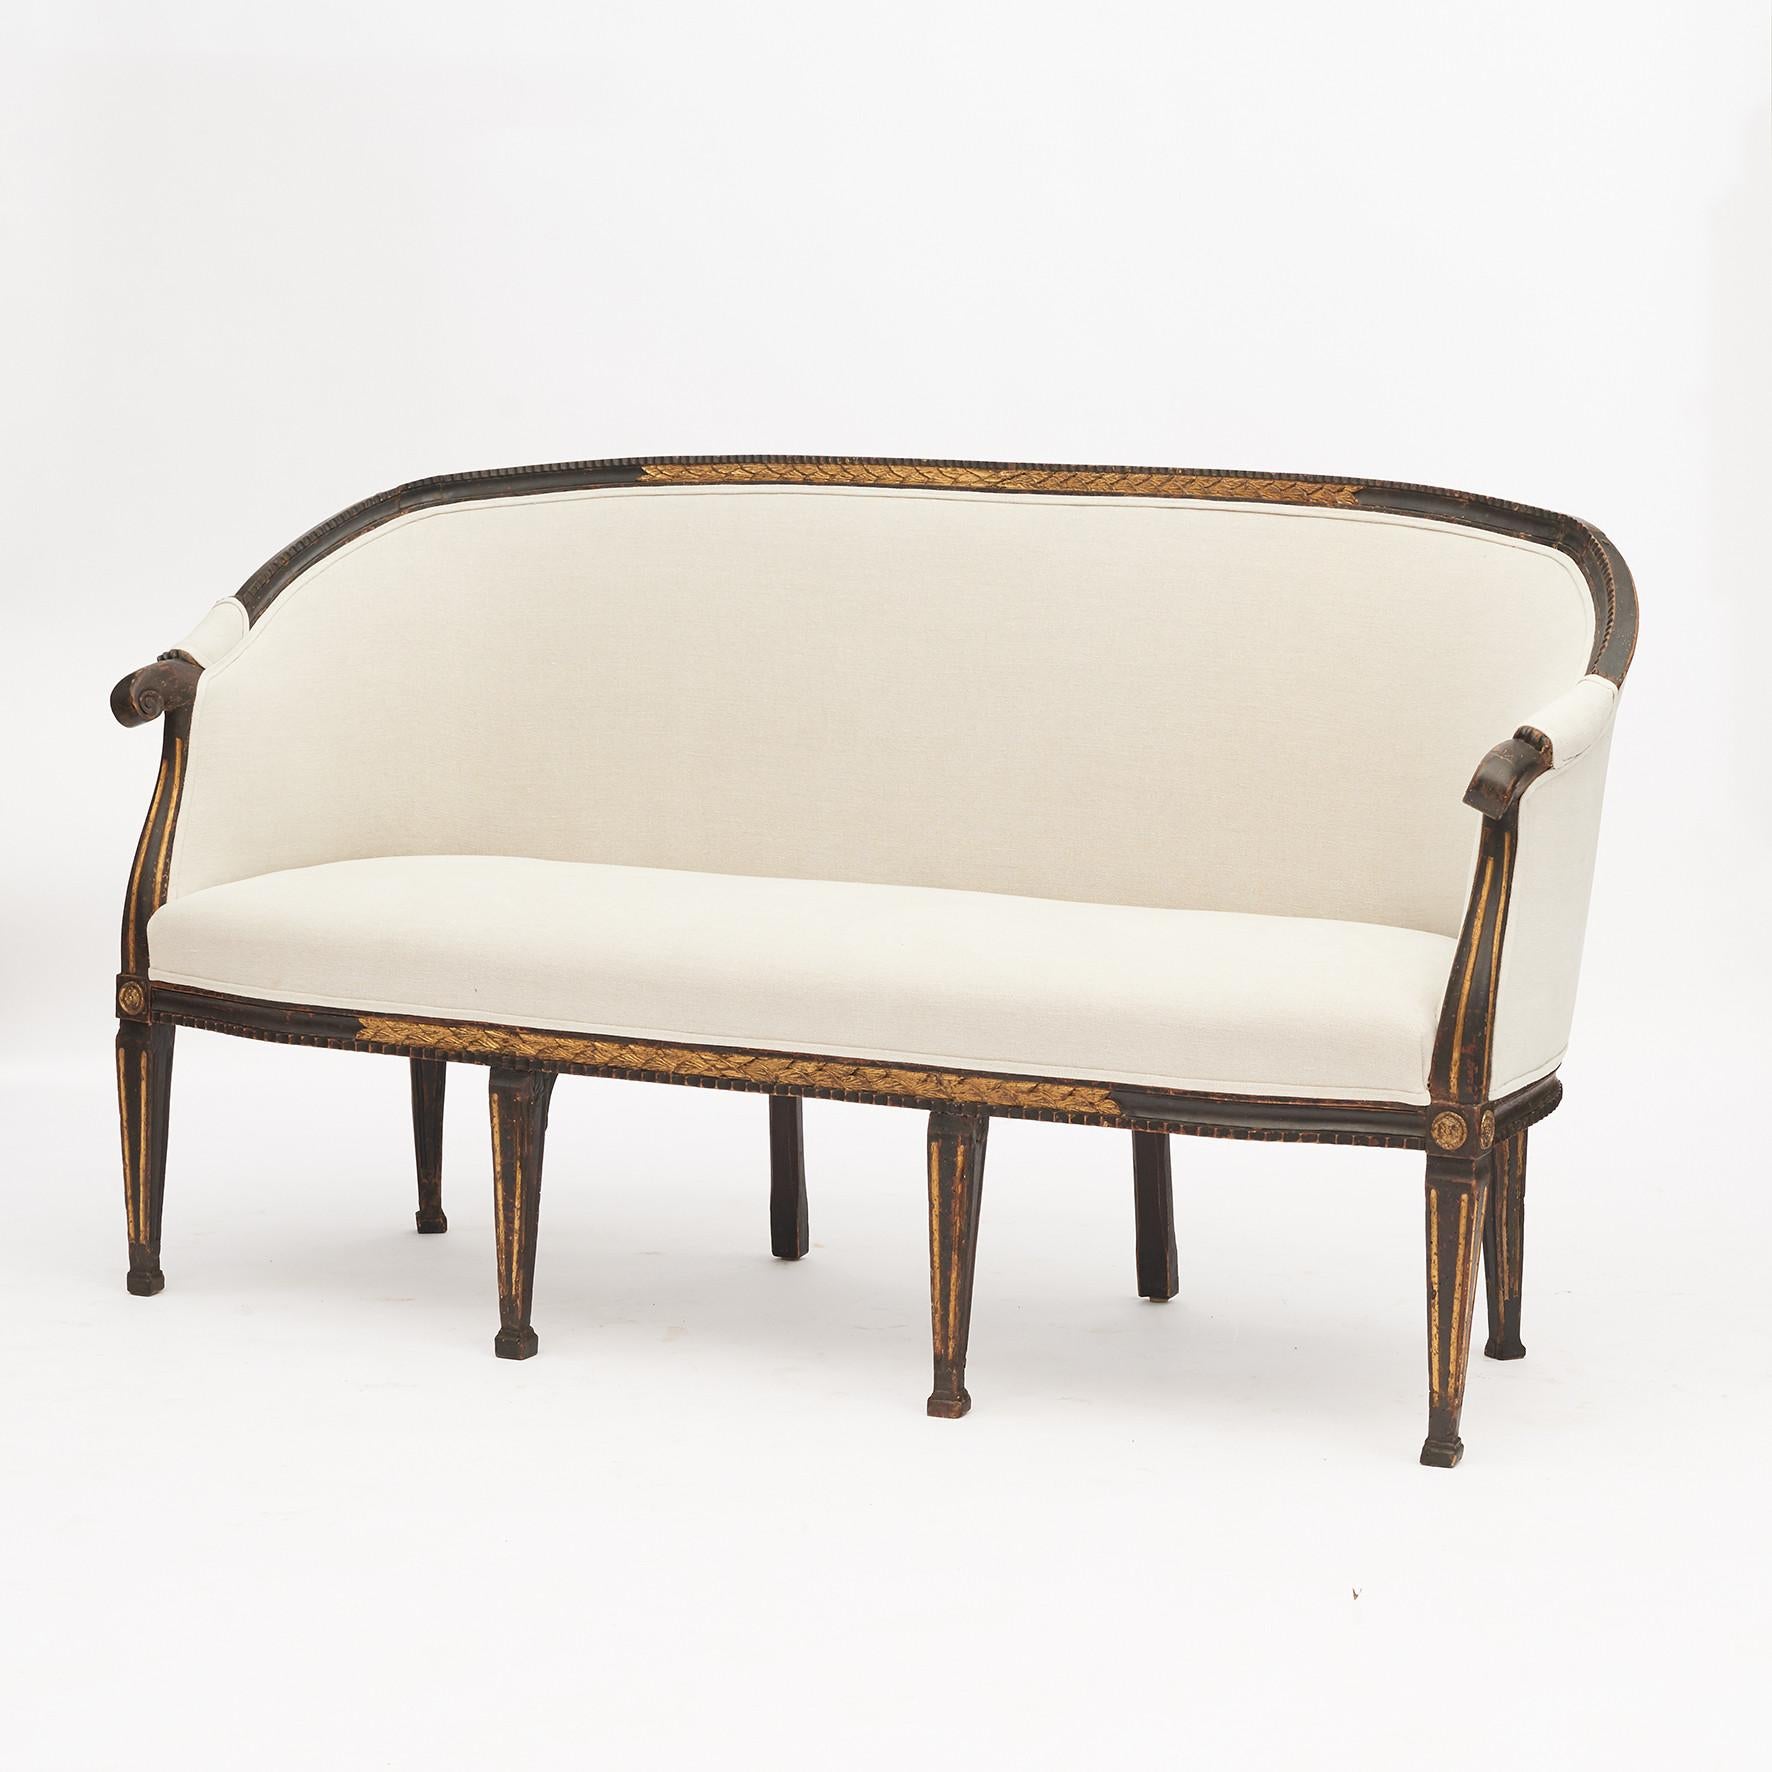 French Louis XVI canapé sofa.
Ebonized wood. Gilded foliage wood carvings. Supported on eight tapering and gilt fluted legs terminating on block feet.
France, 1780-1790.
Reupholstered in hemp fabric from 'Edmond Petit'.